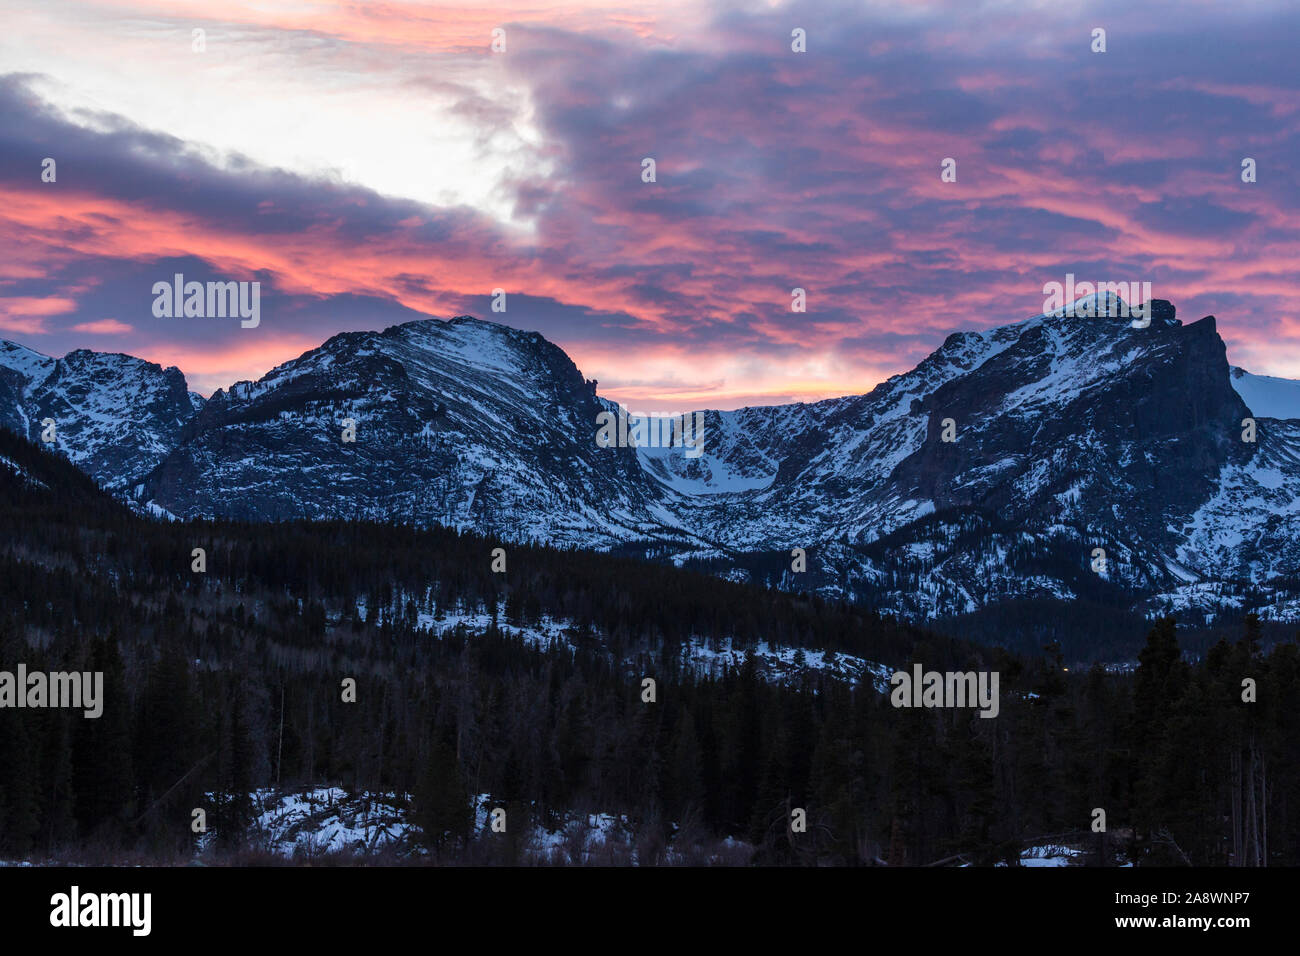 A beautiful sunset over the mountains overlooking Sprague Lake in Rocky Mountain National Park in Colorado. Stock Photo